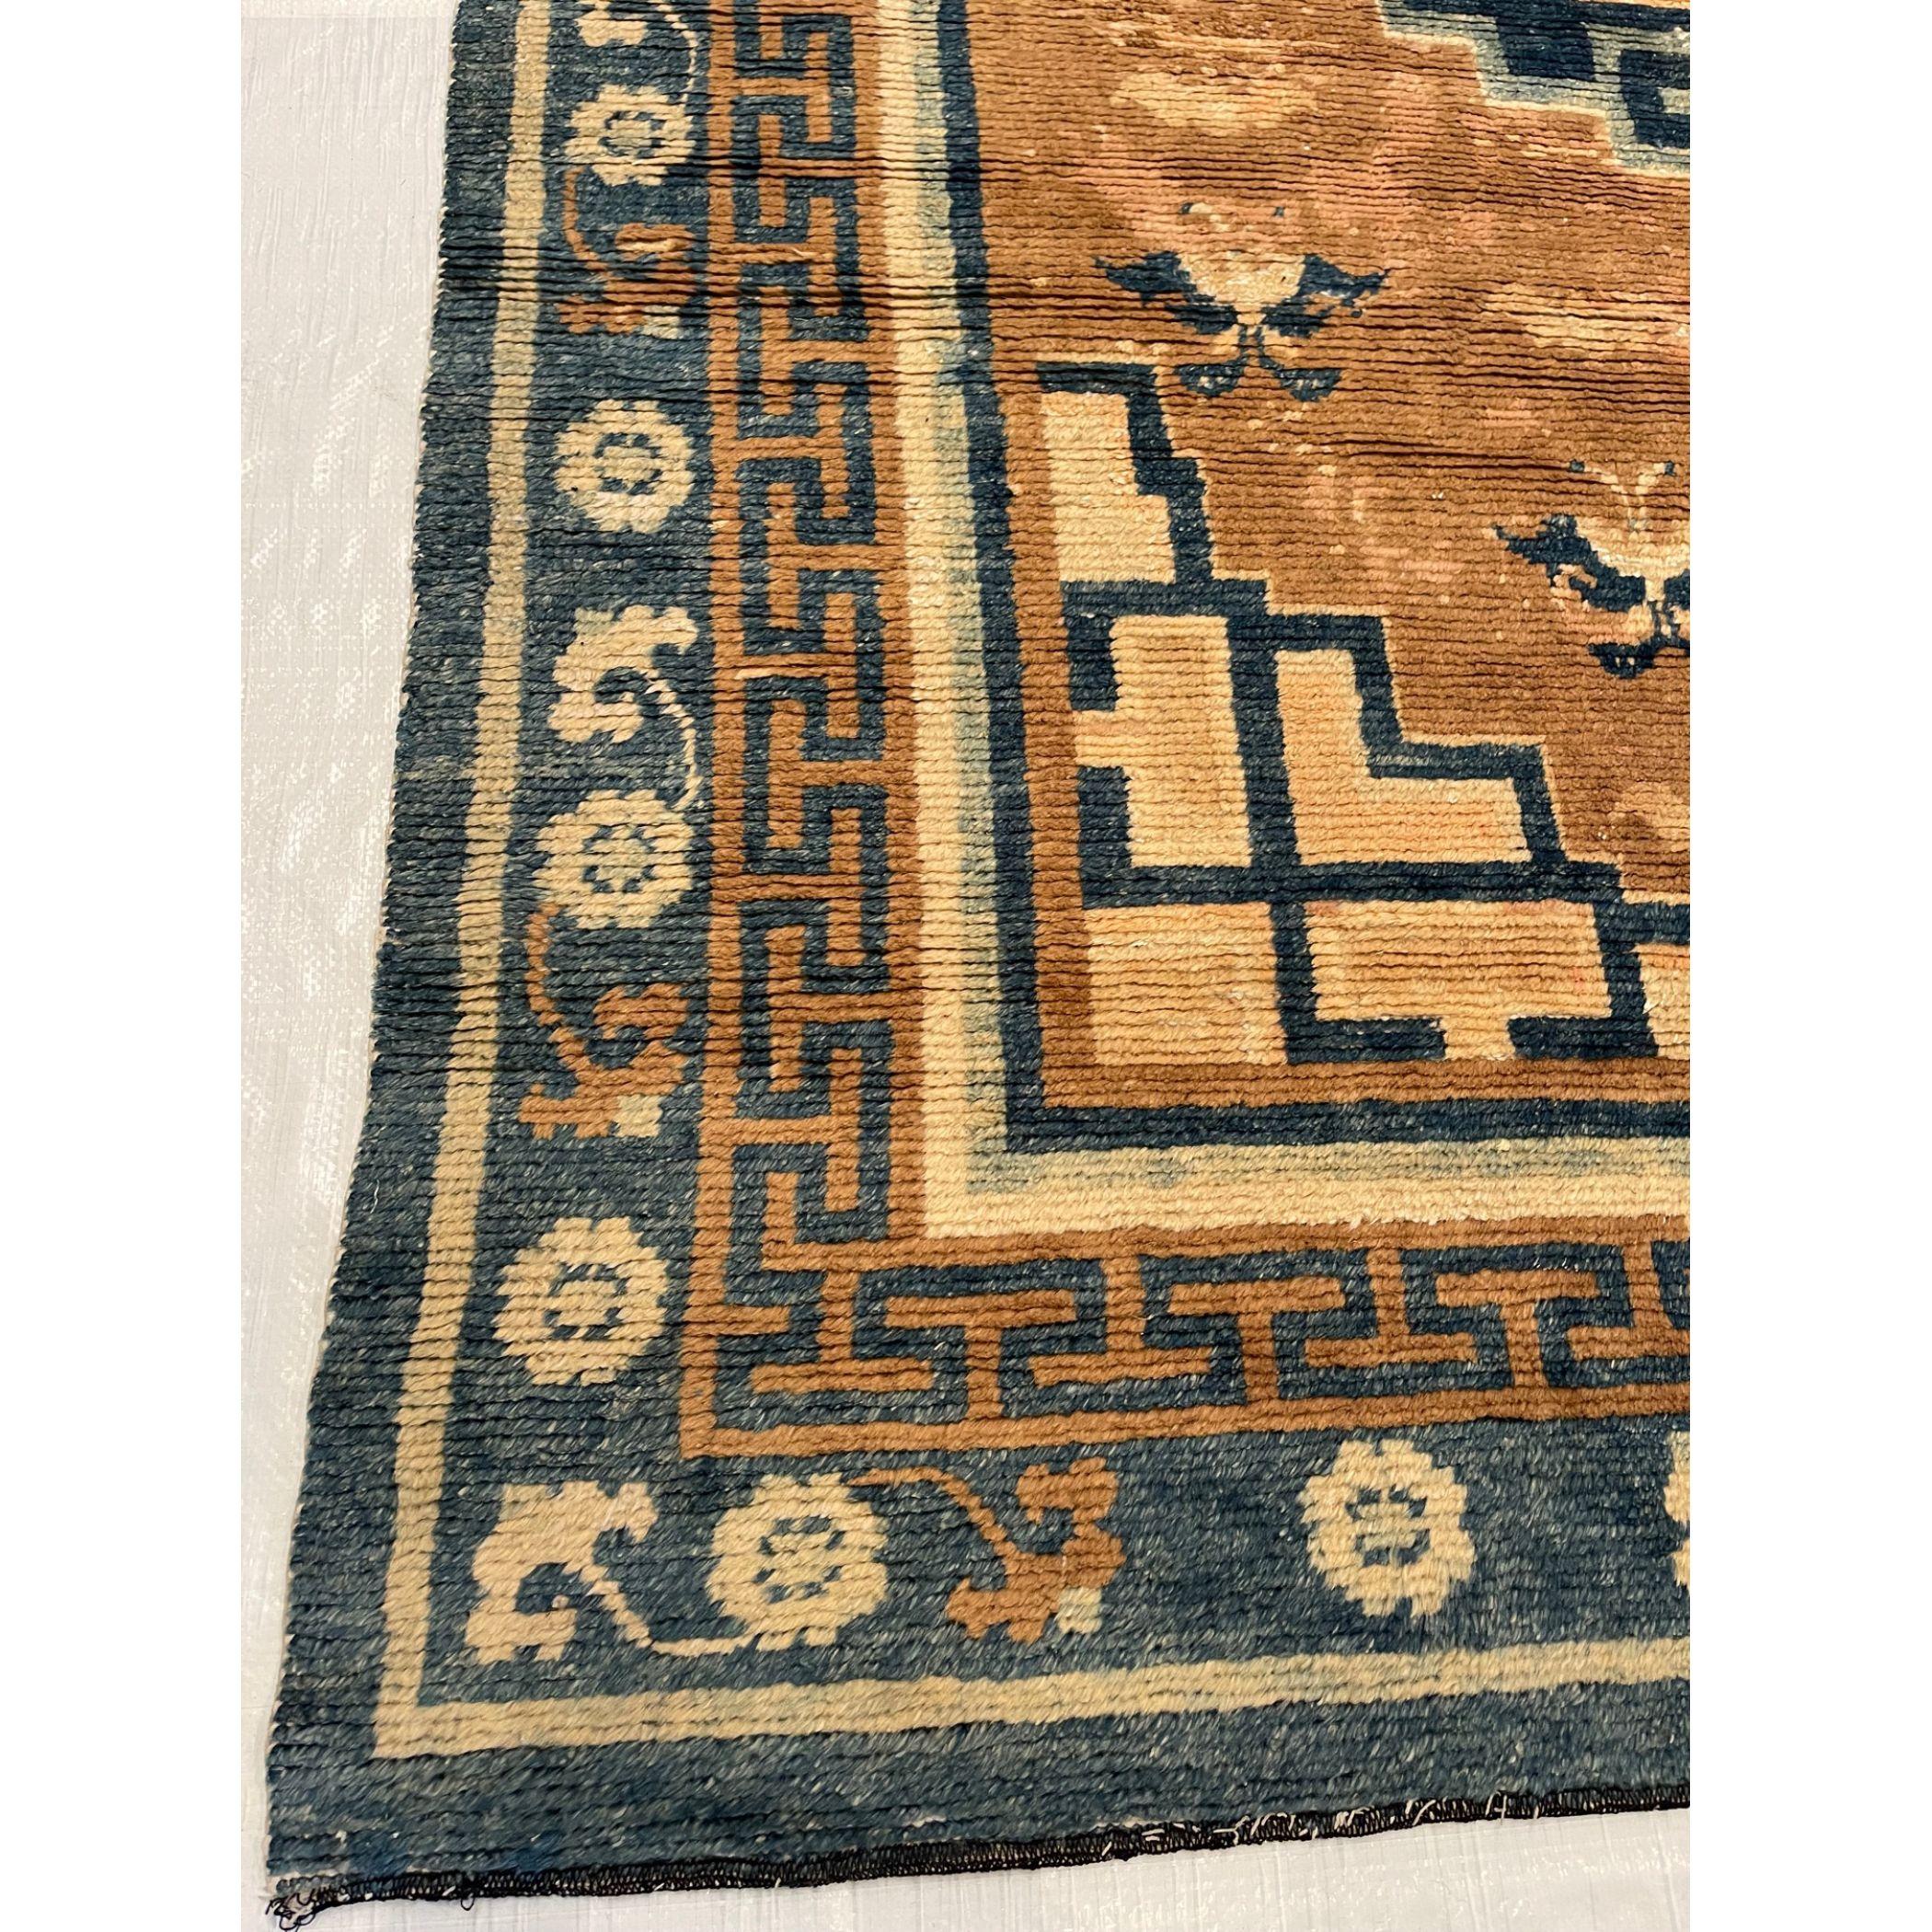 Other Antique Chinese Floral Design Rug For Sale